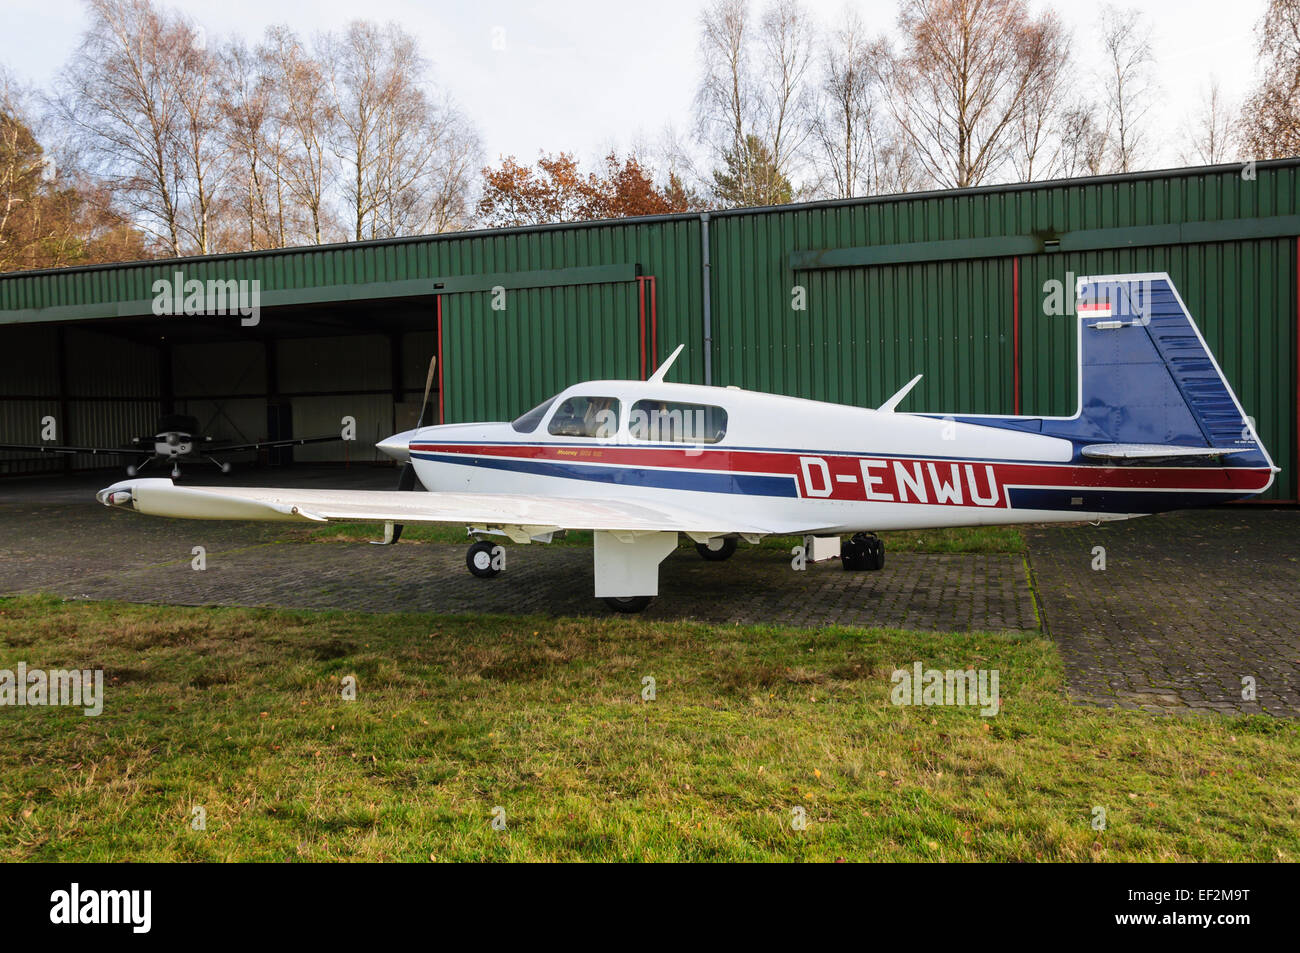 Private aircraft Mooney M20J '201' parked in front of green hangar in Celle, Germany Stock Photo